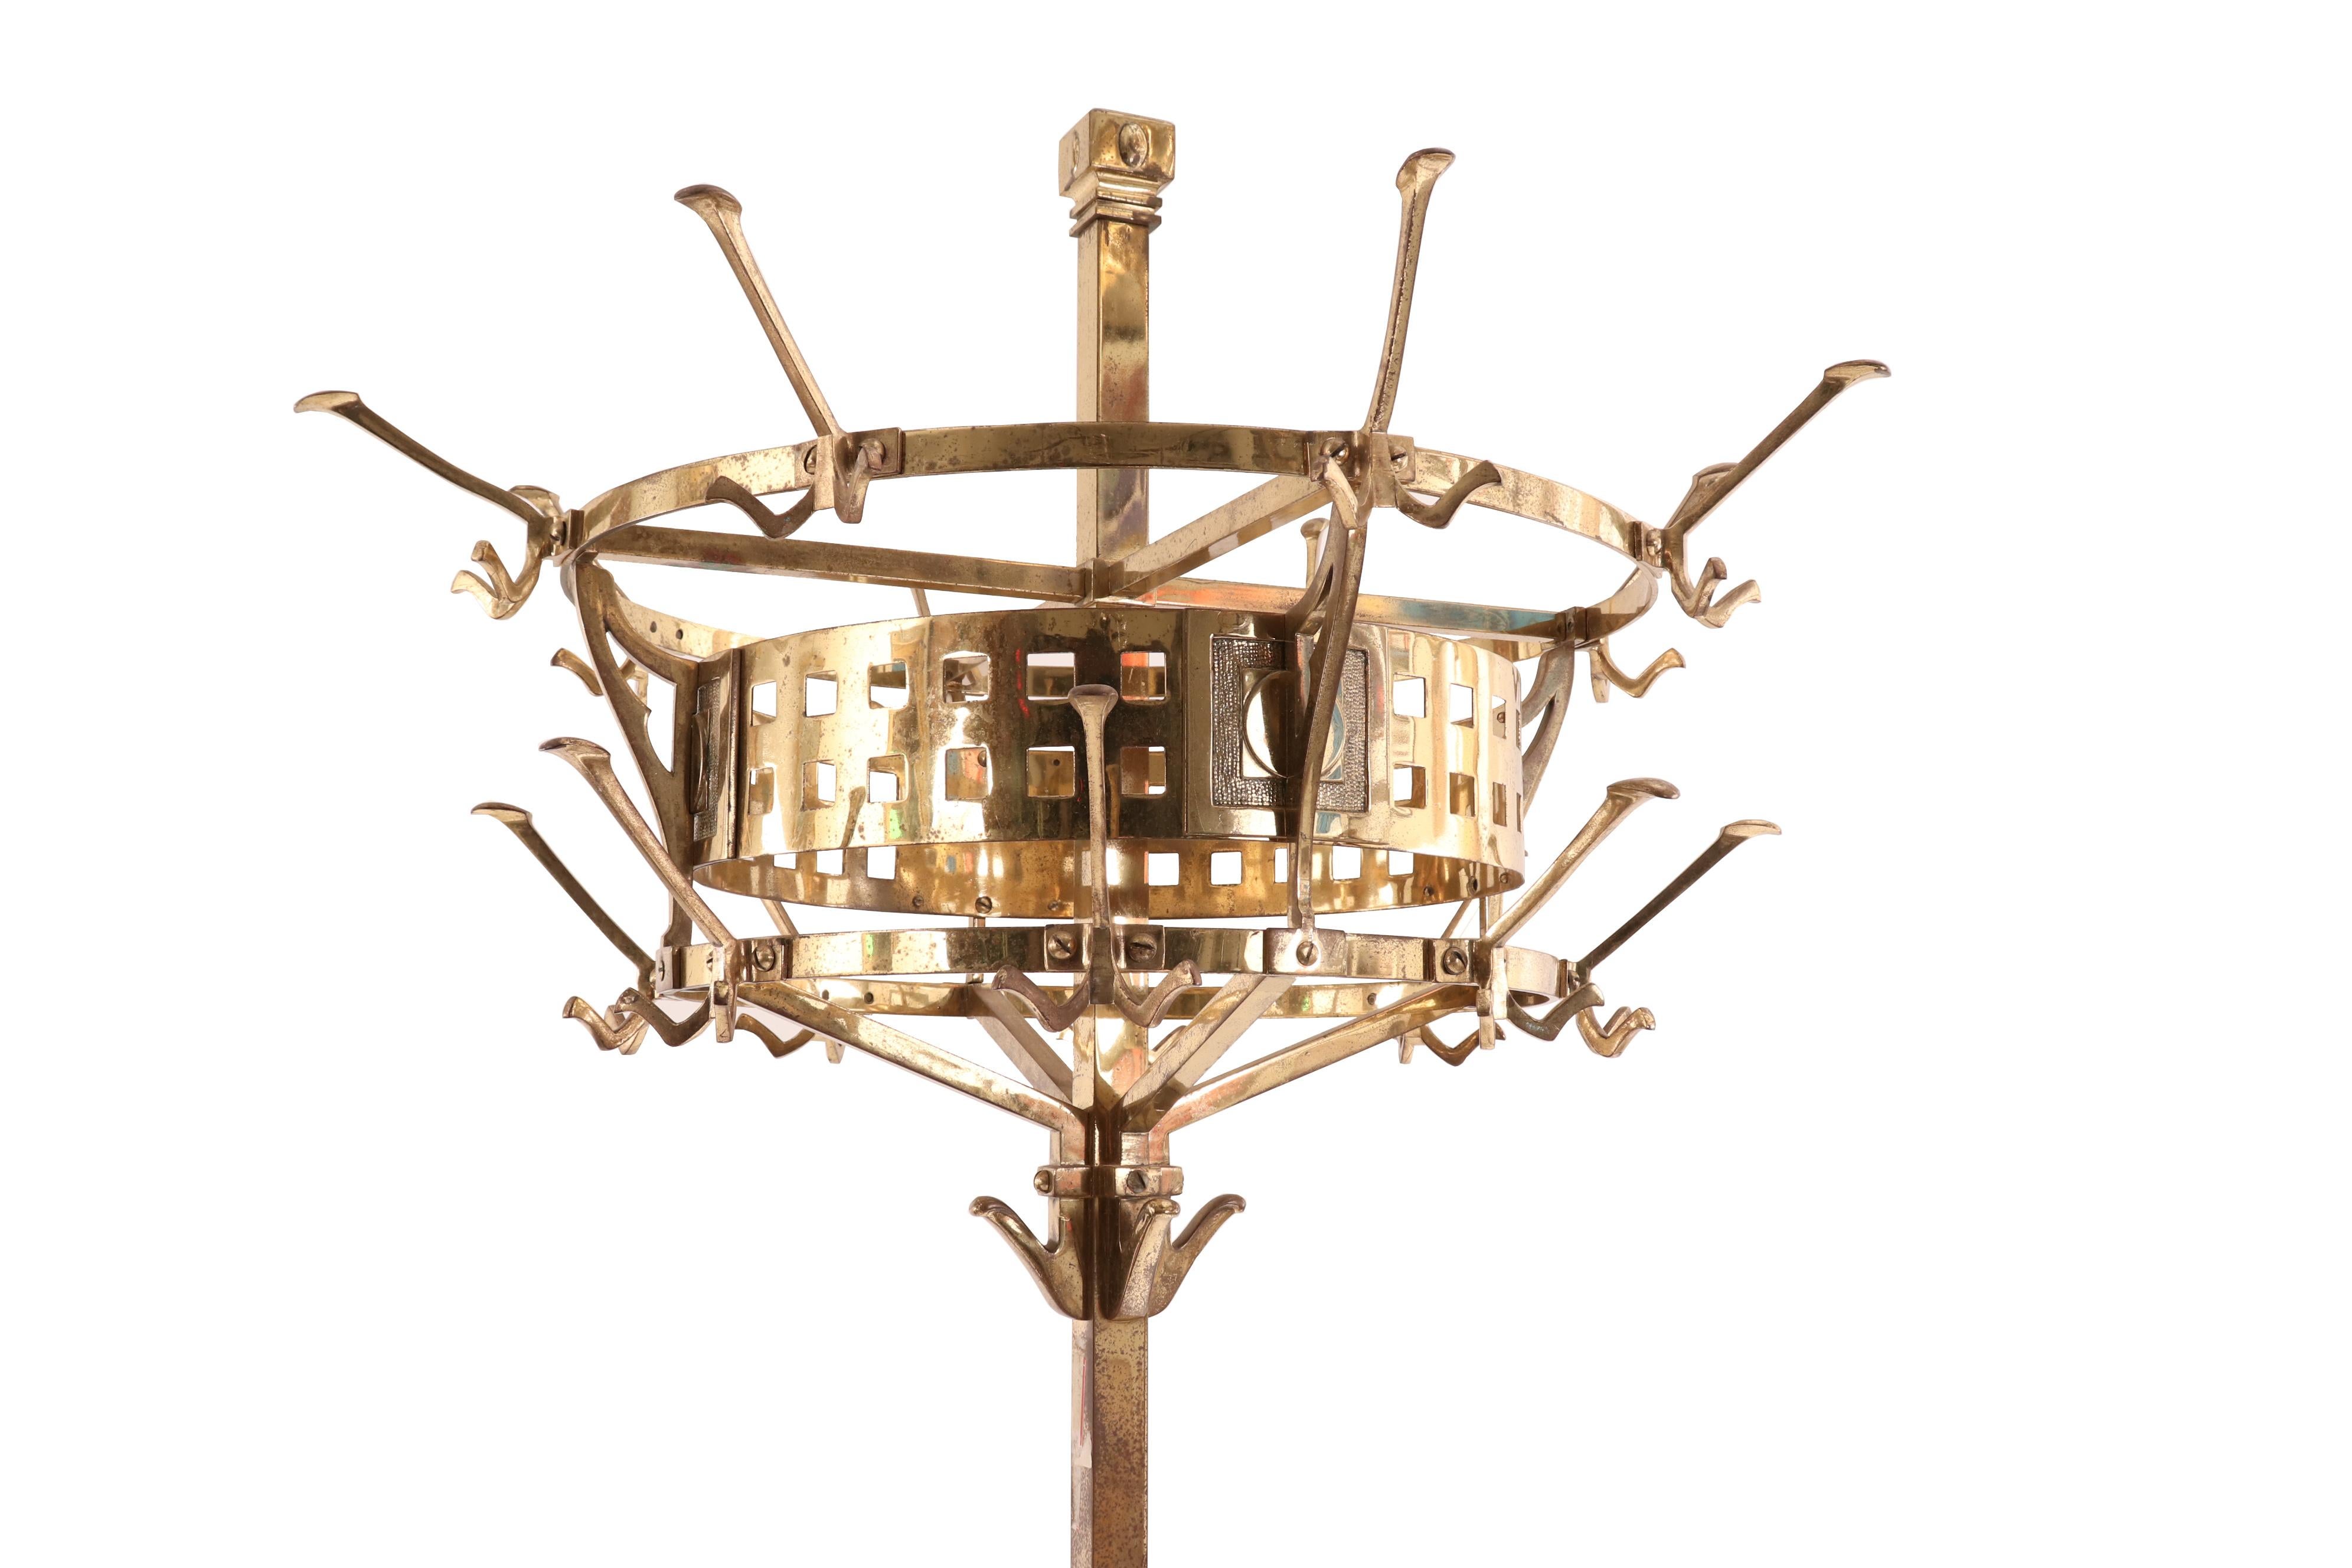 English Aesthetic Movement brass hat rack with circular top, three sets of hooks, and space for umbrellas in the base.